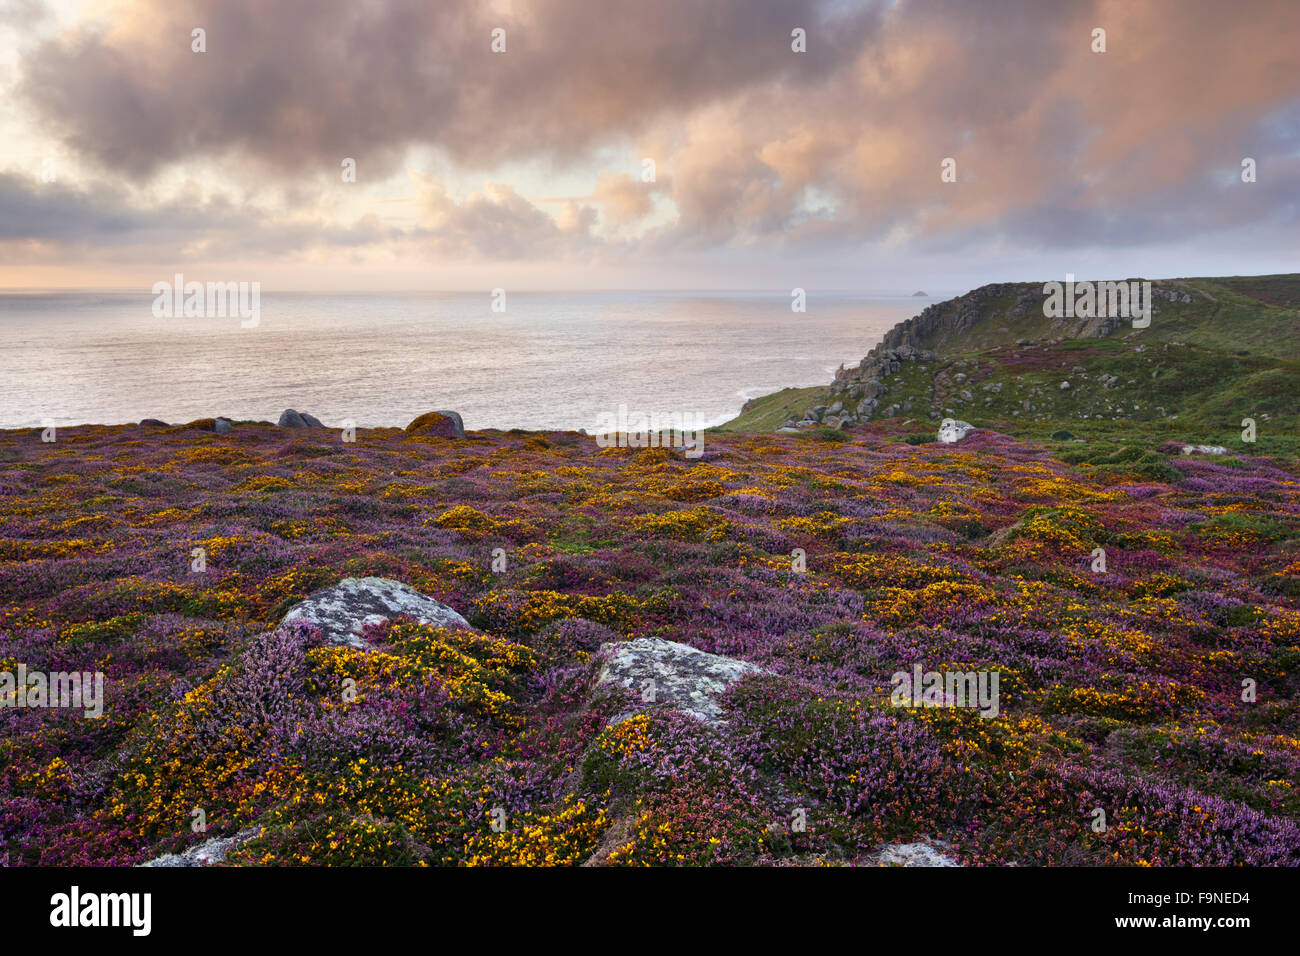 Tarda estate, heather blooming on the cliff tops al Land's End Foto Stock